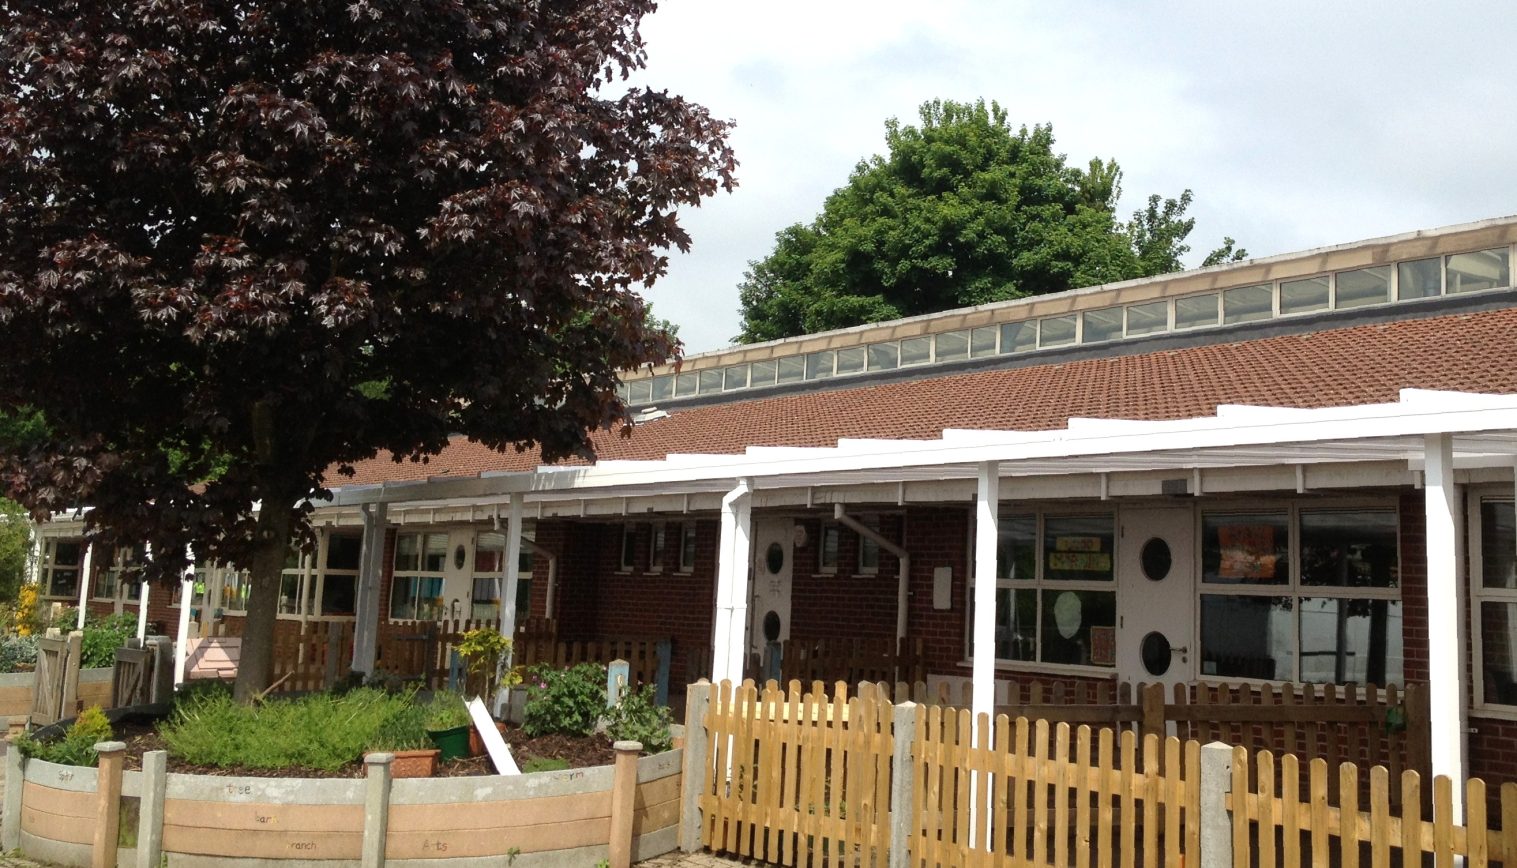 Holmesdale Infant School – 2nd Wall Mounted Canopy